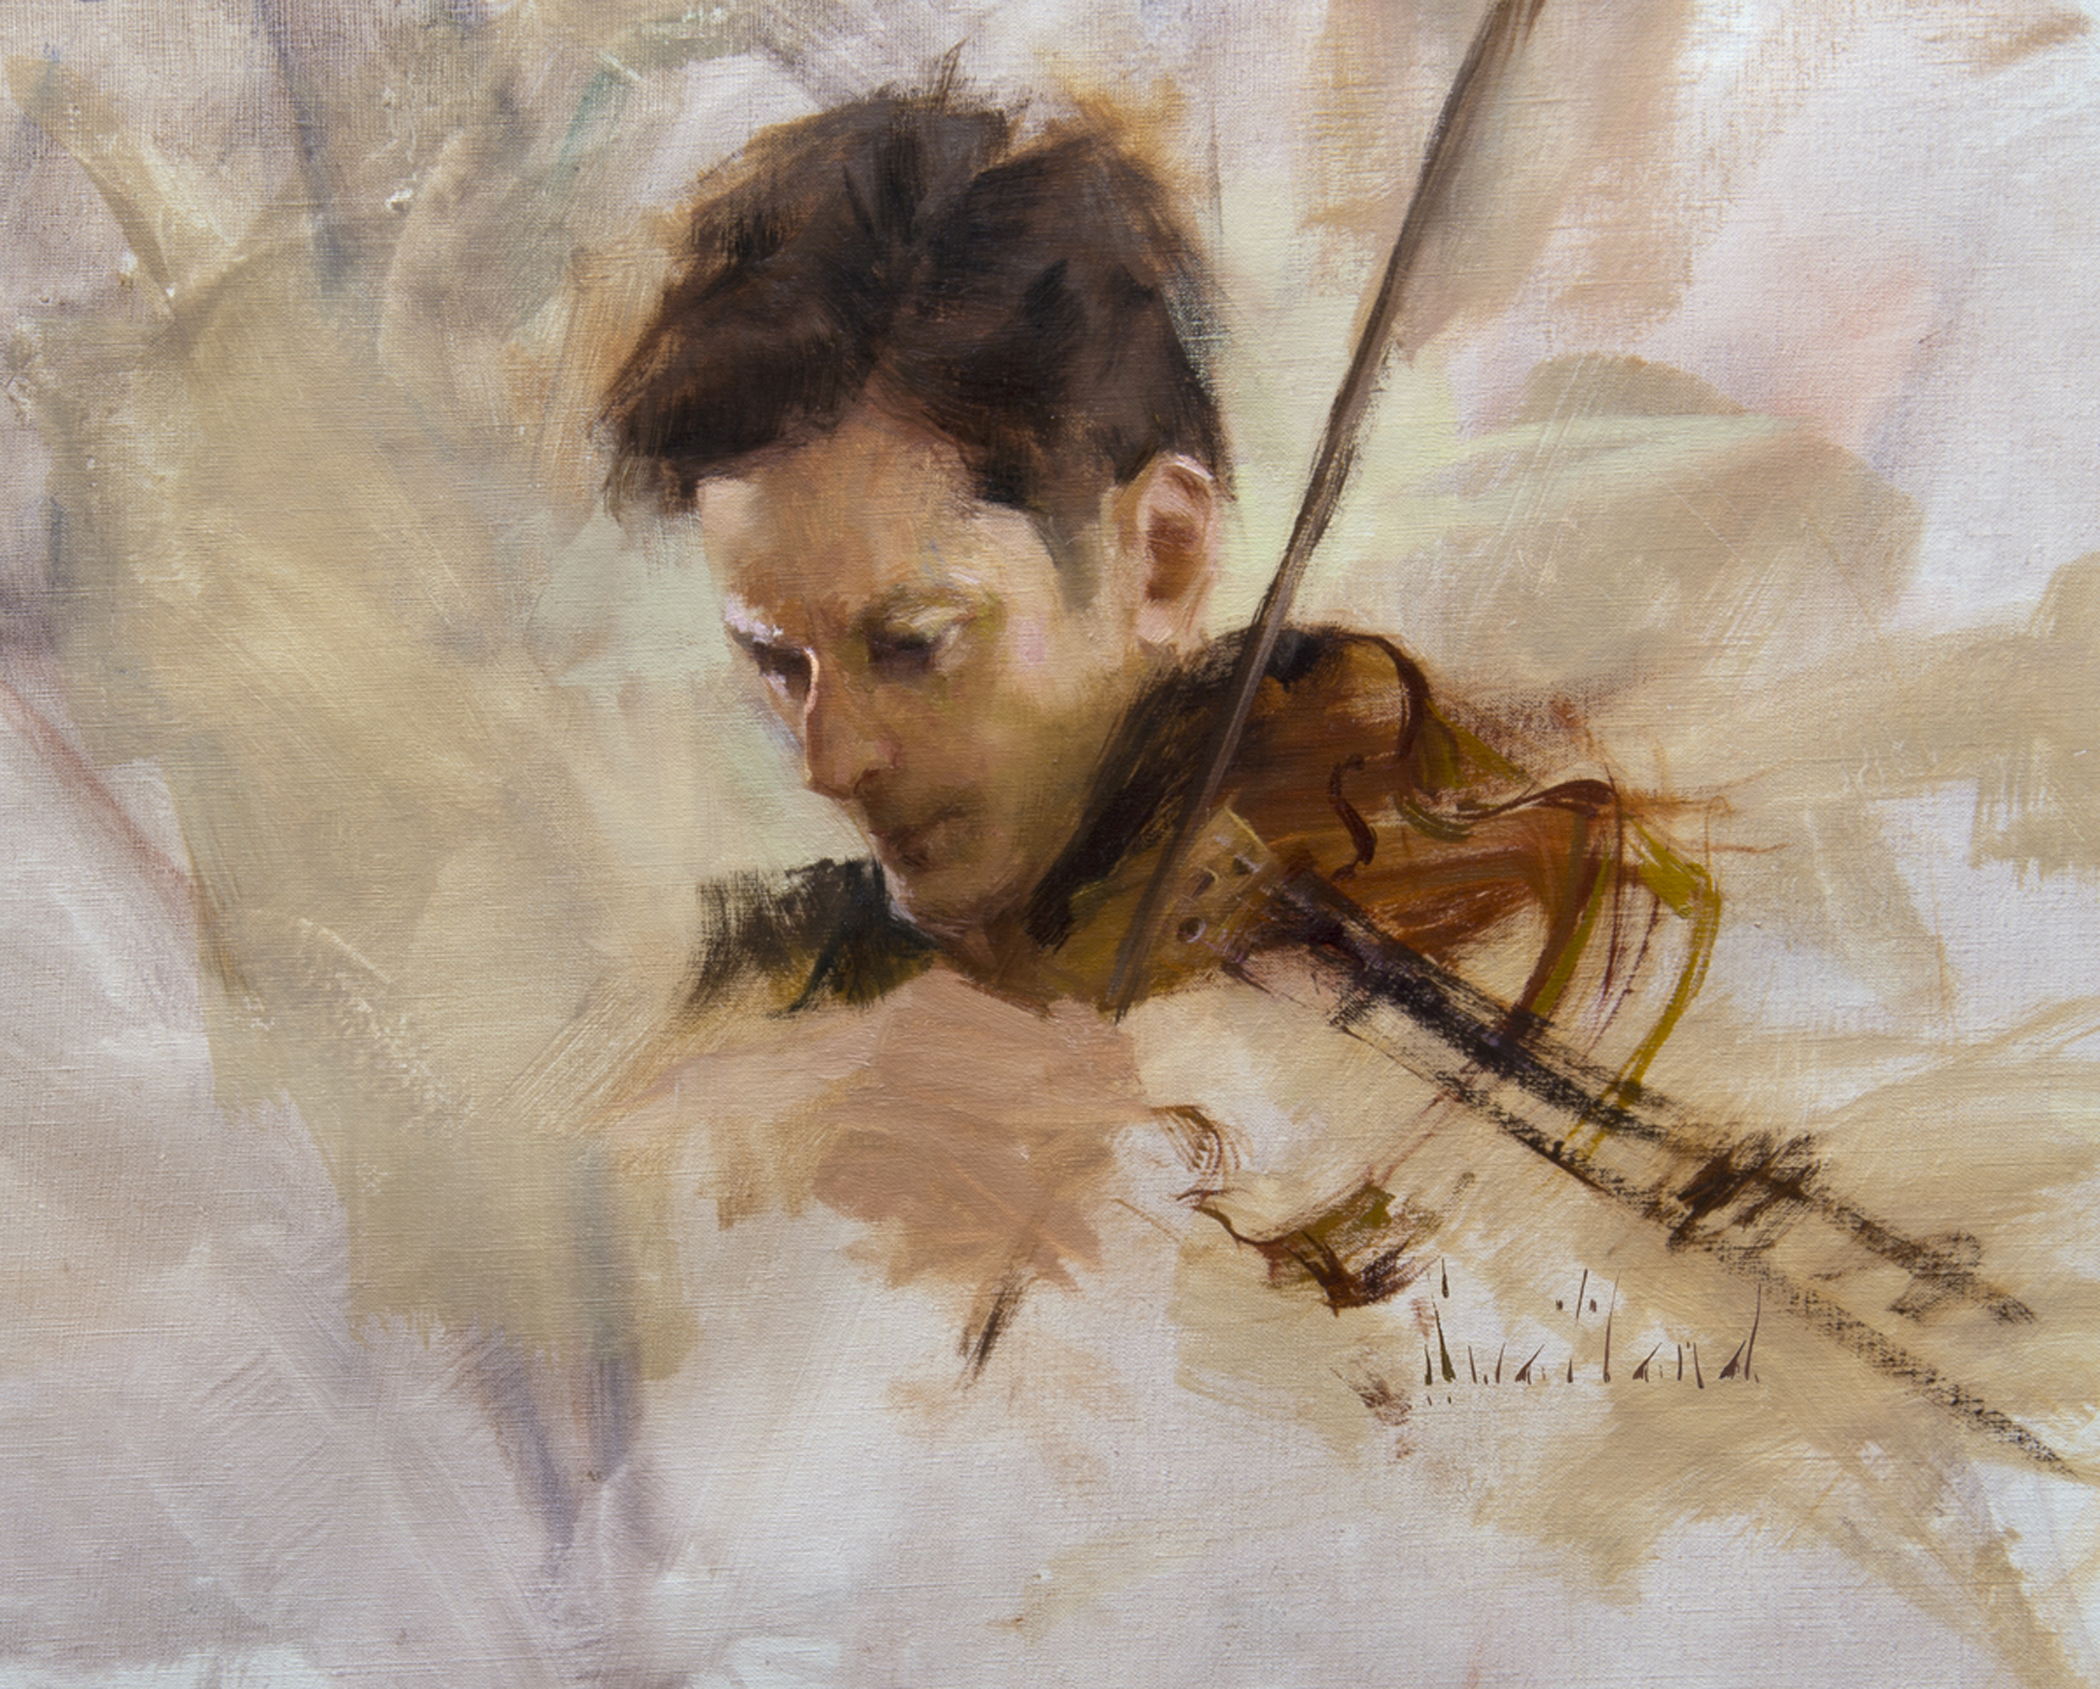 Painting of a man playing violin